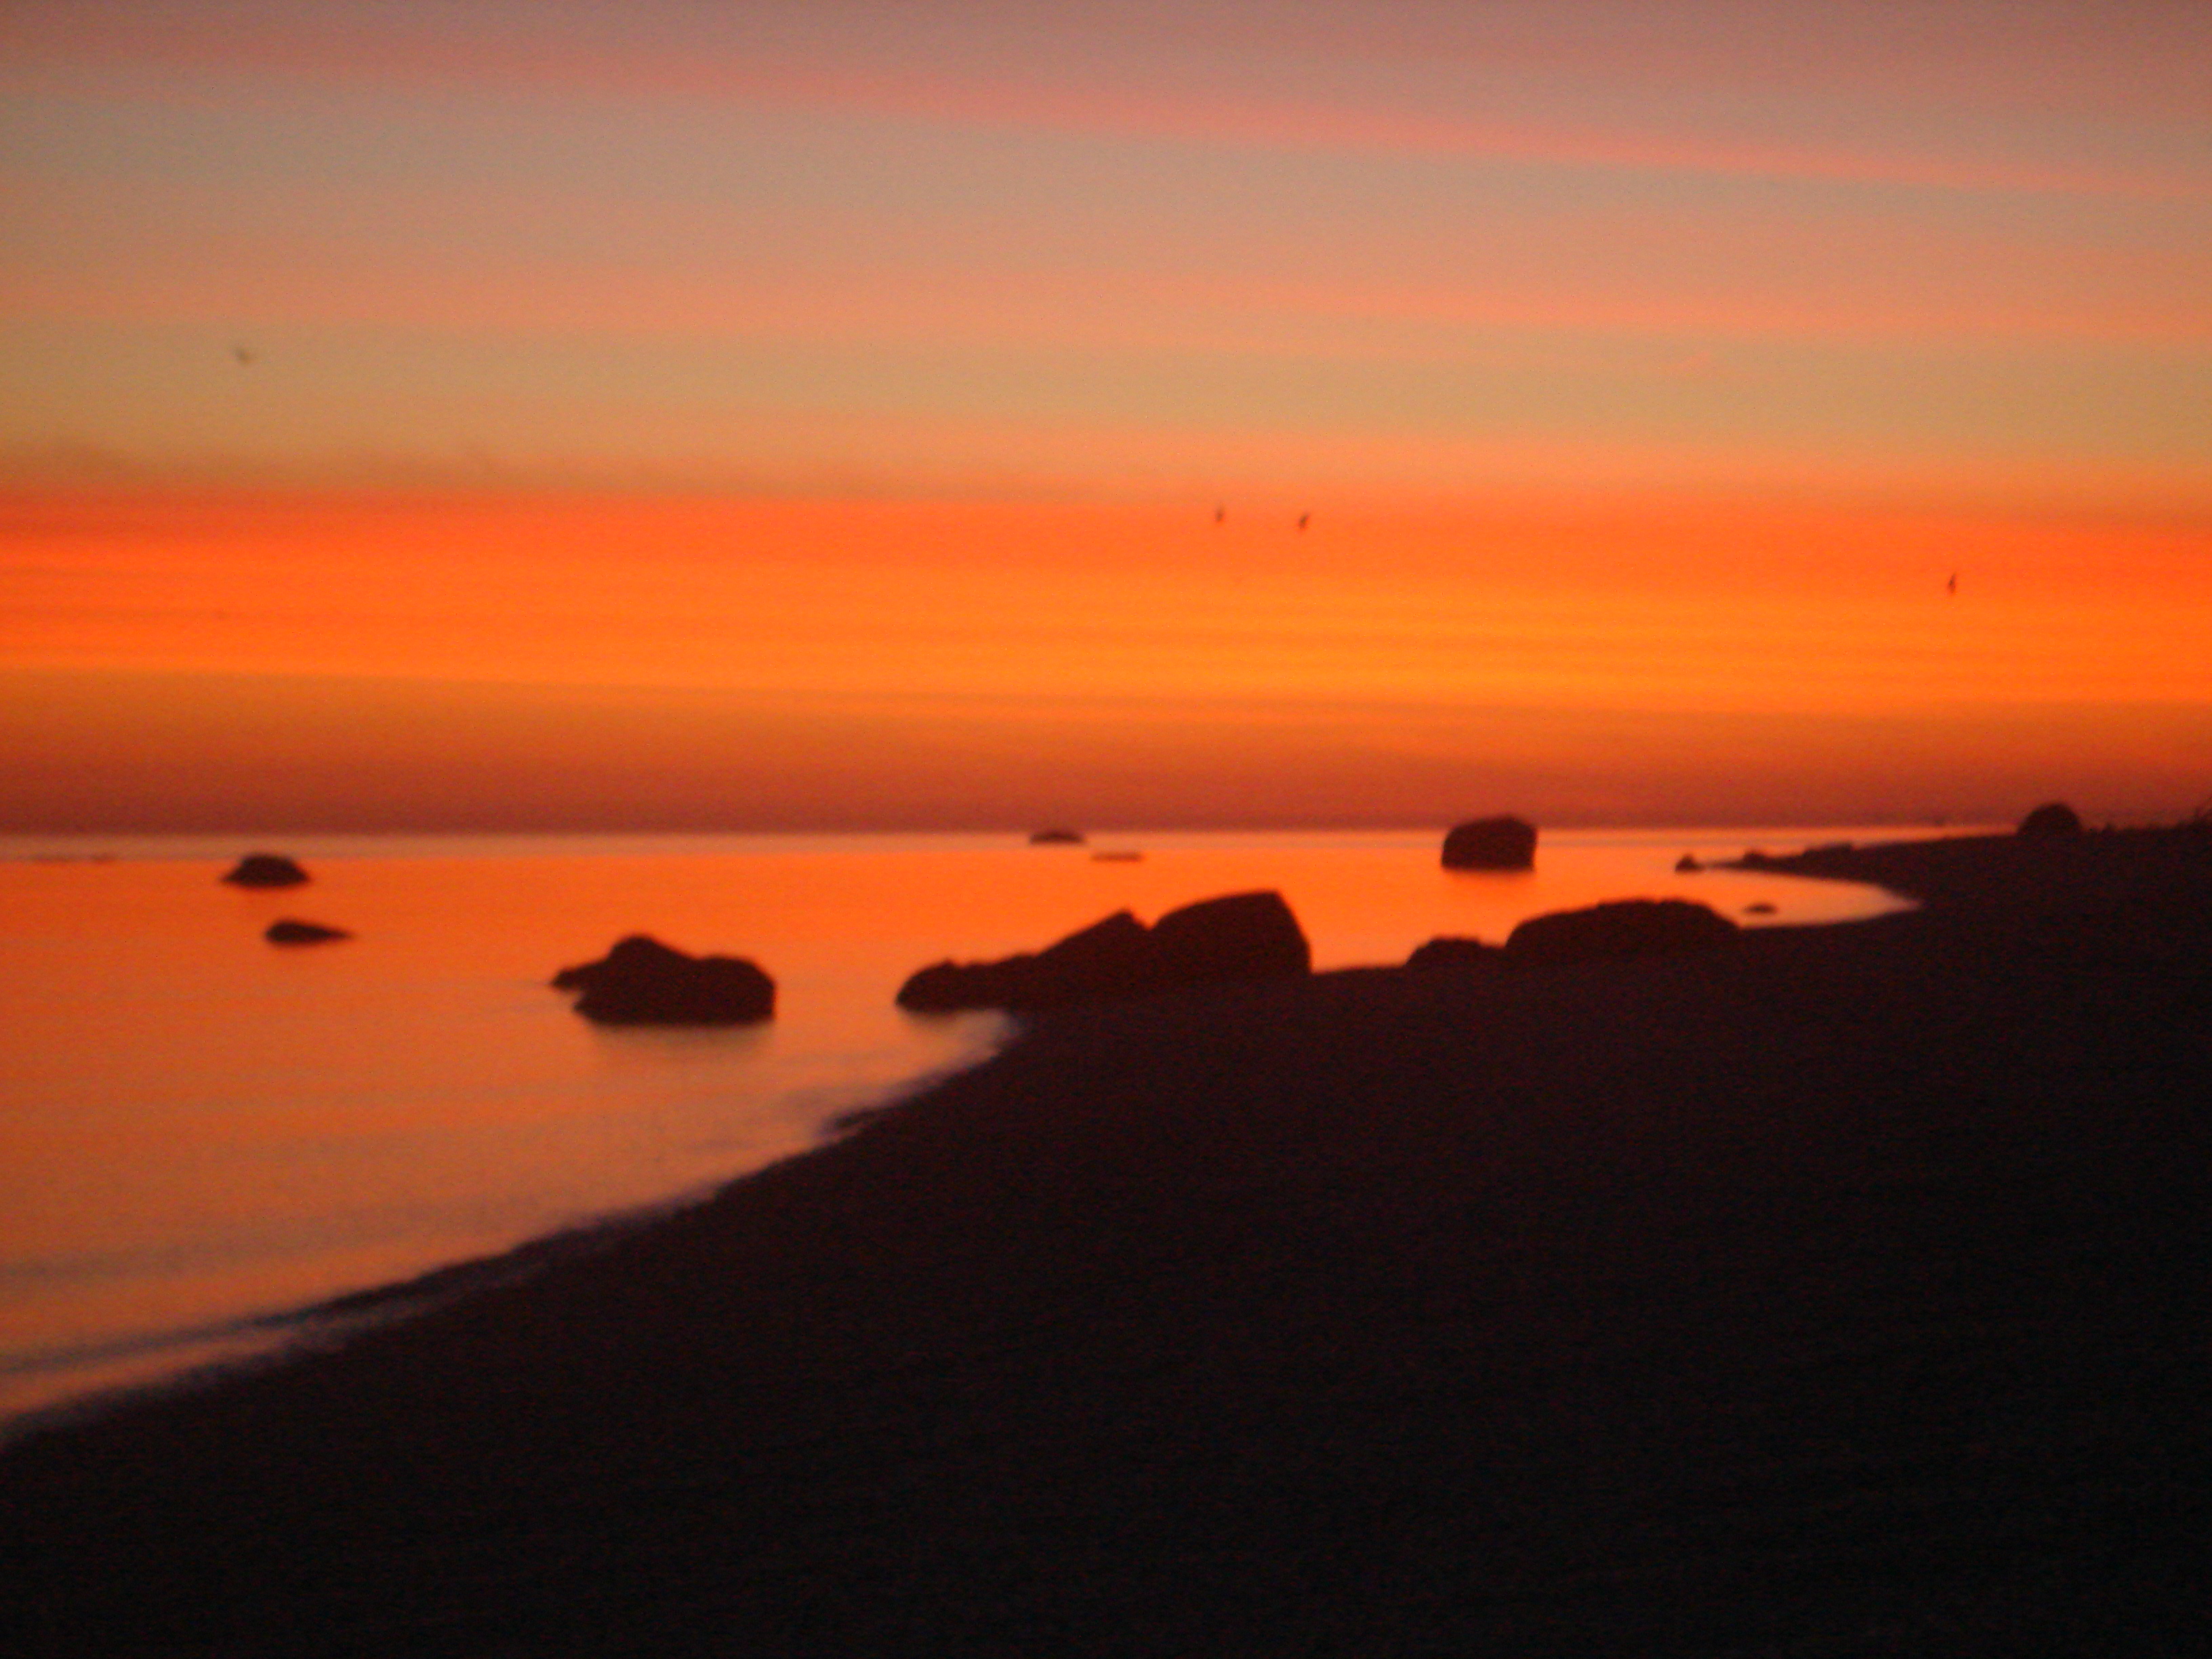 File:Miller Place Beach at Dawn; Red Sky.JPG - Wikimedia Commons